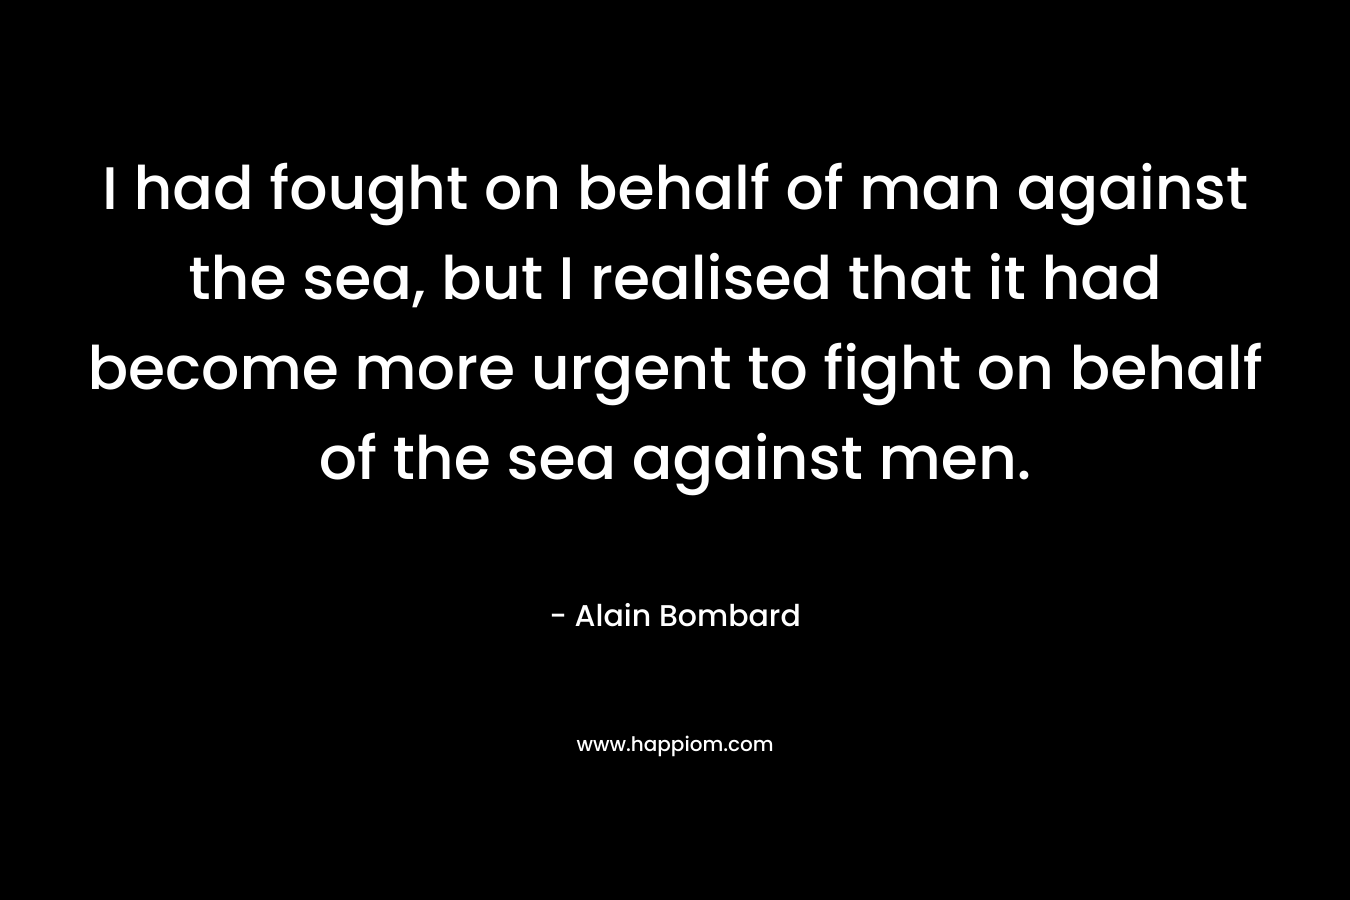 I had fought on behalf of man against the sea, but I realised that it had become more urgent to fight on behalf of the sea against men.